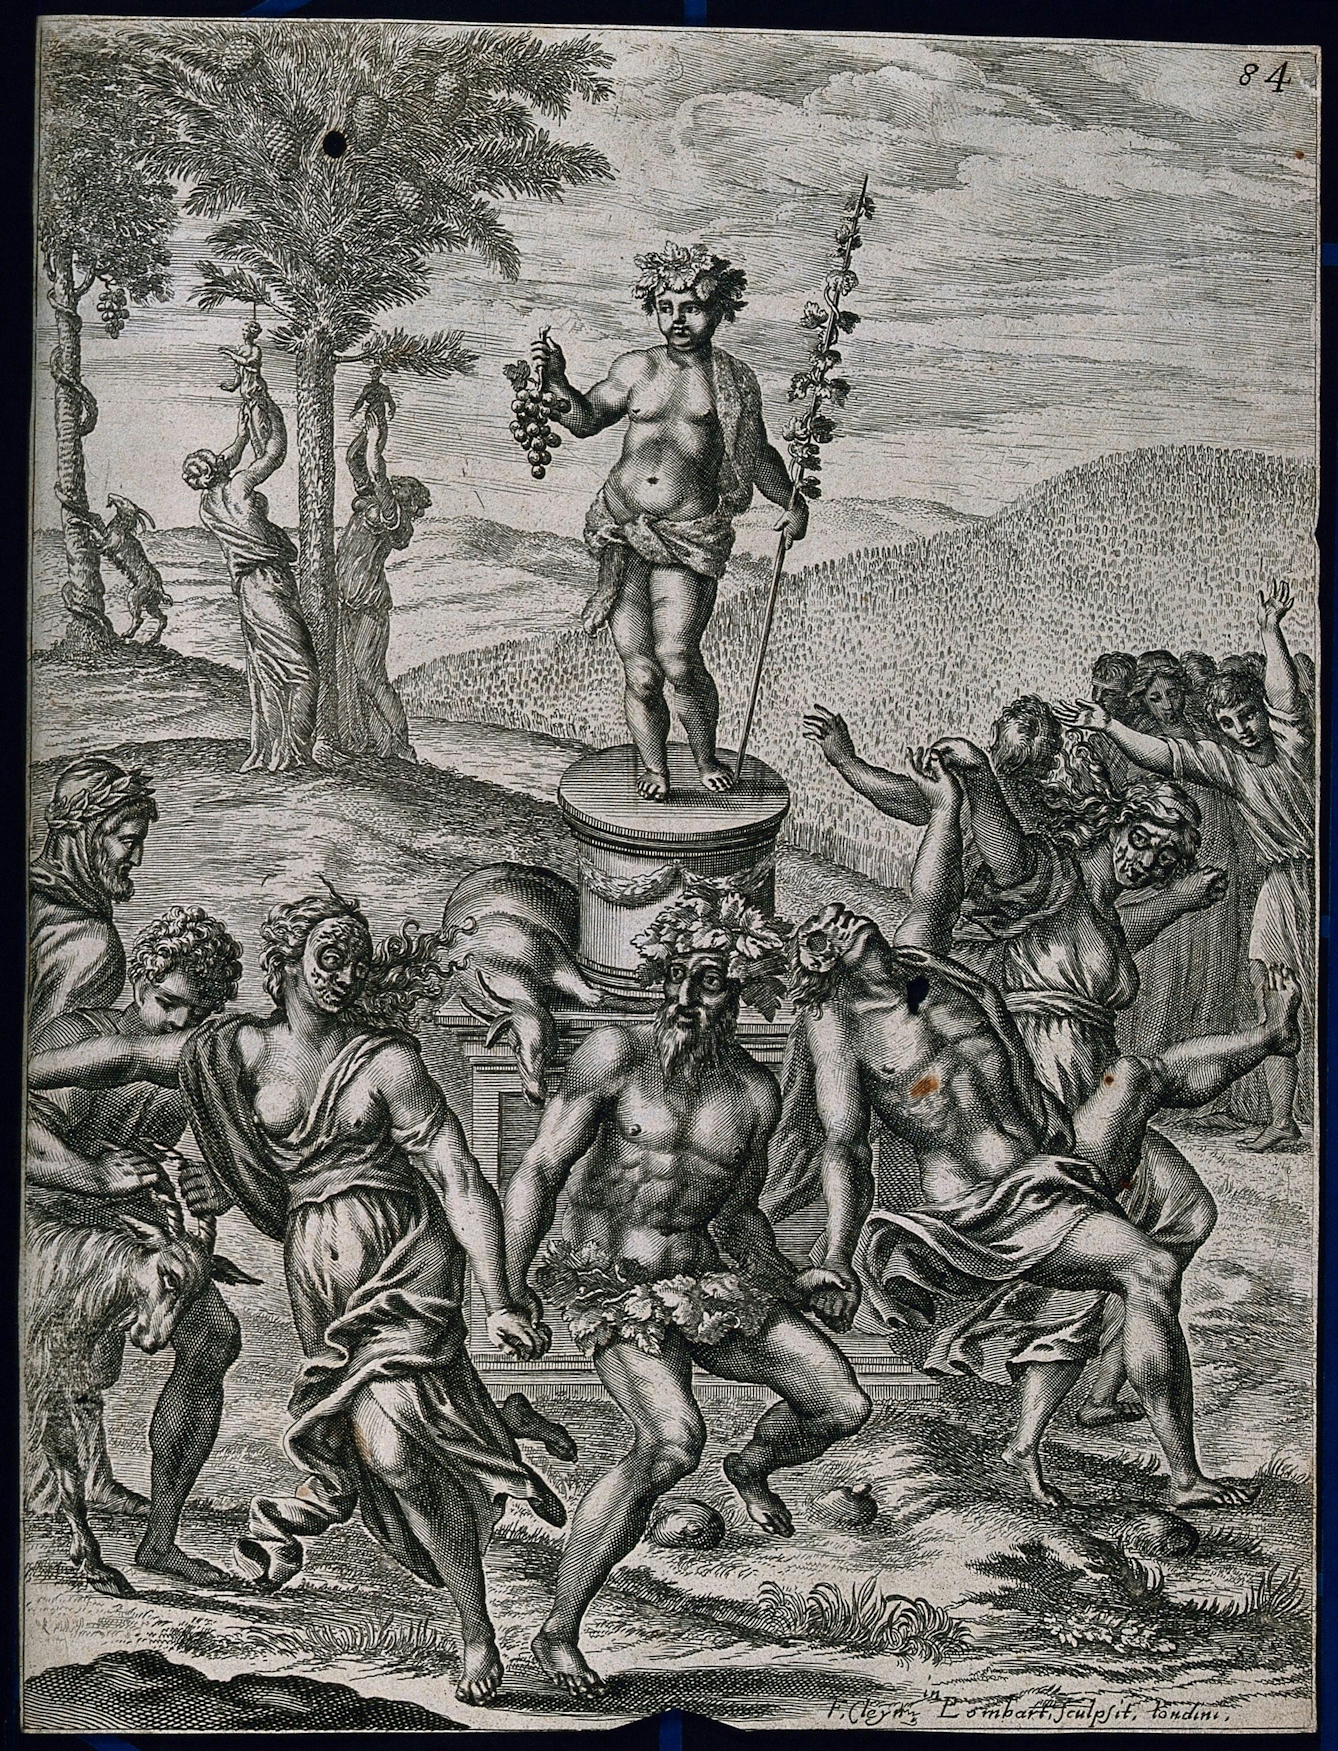 Engraved illustration of a figure standing atop a plinth in the countryside, holding a bunch of grapes, surrounded by reveling dancers.